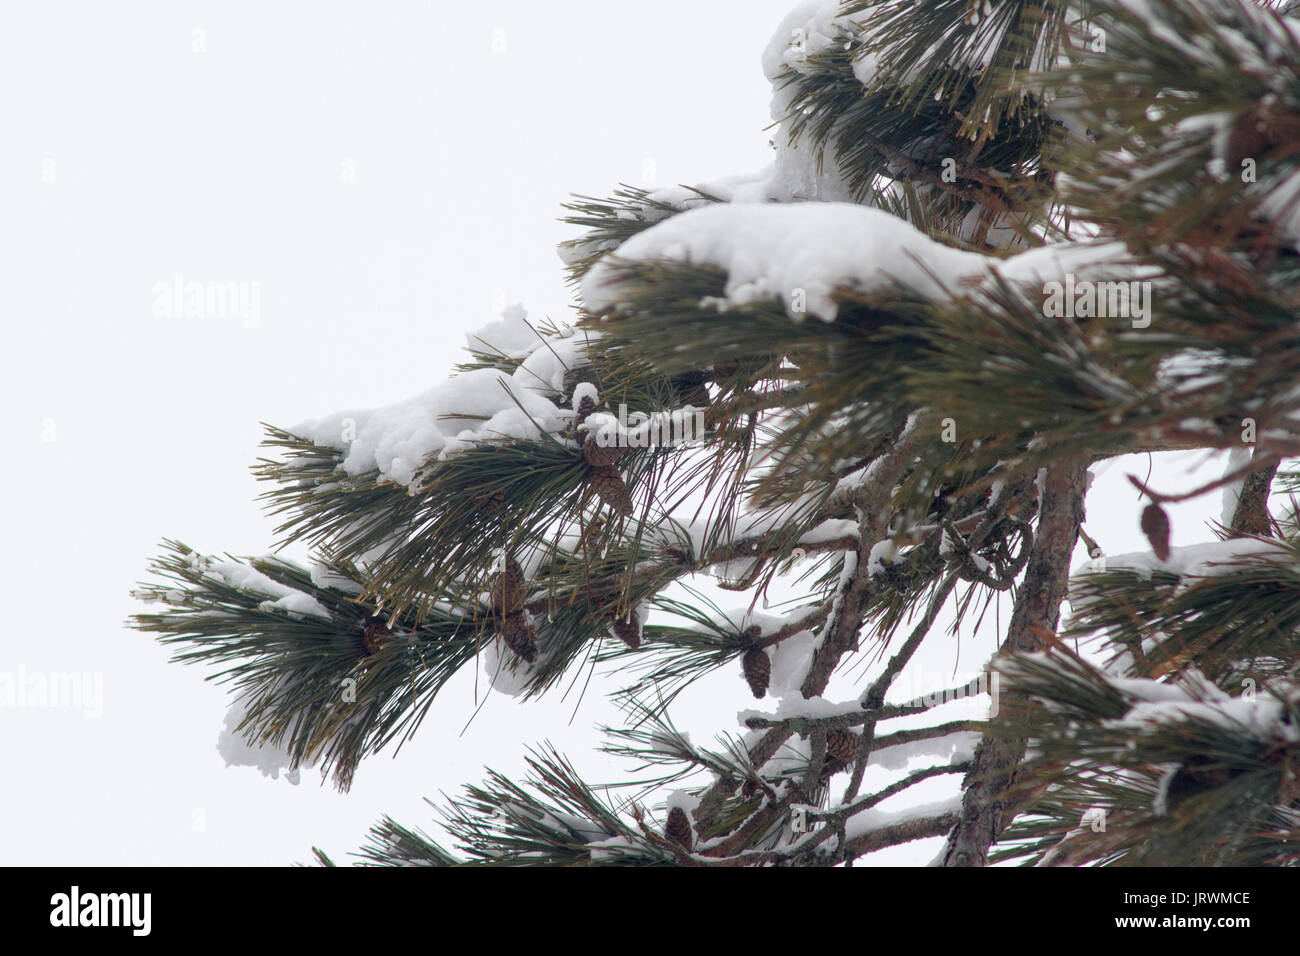 Pine tree branches with snow on top Stock Photo